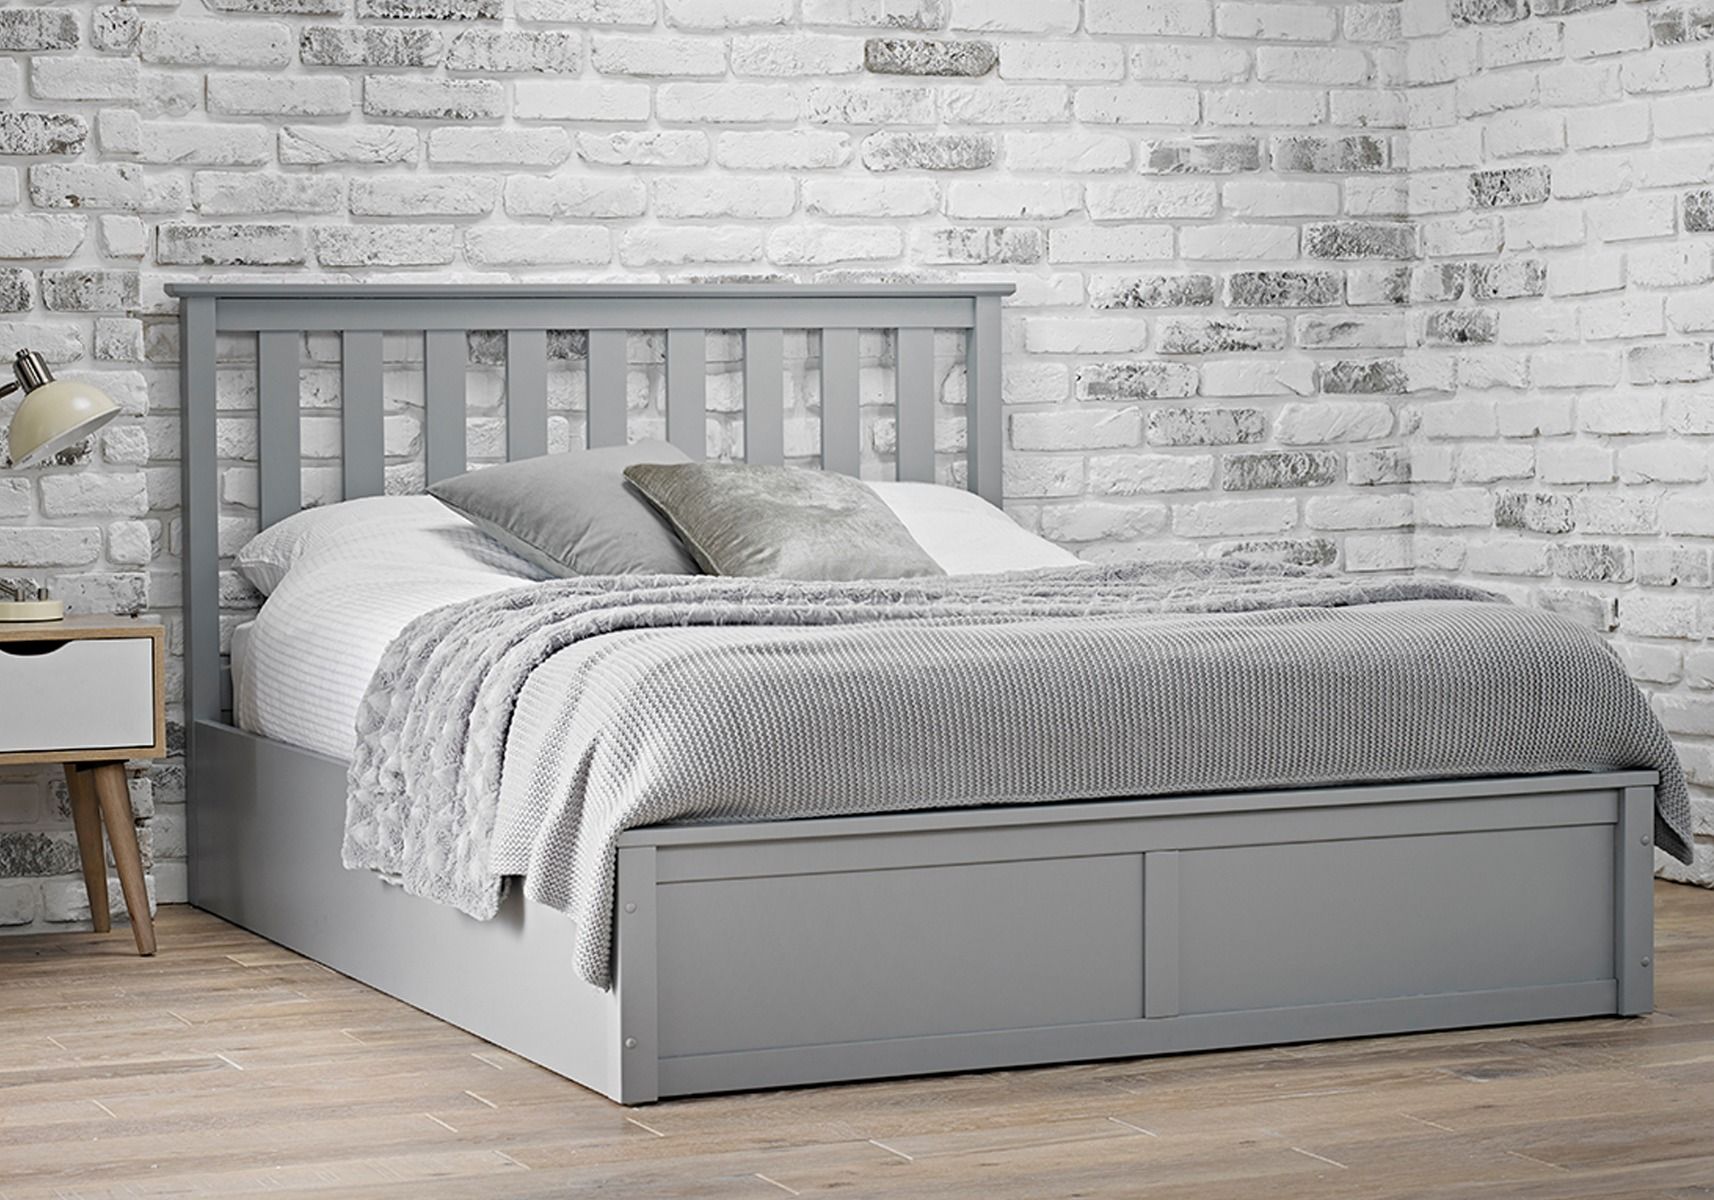 Lpd Oxford Grey Wooden Ottoman Bed Frame, Grey Wooden Bed Frame